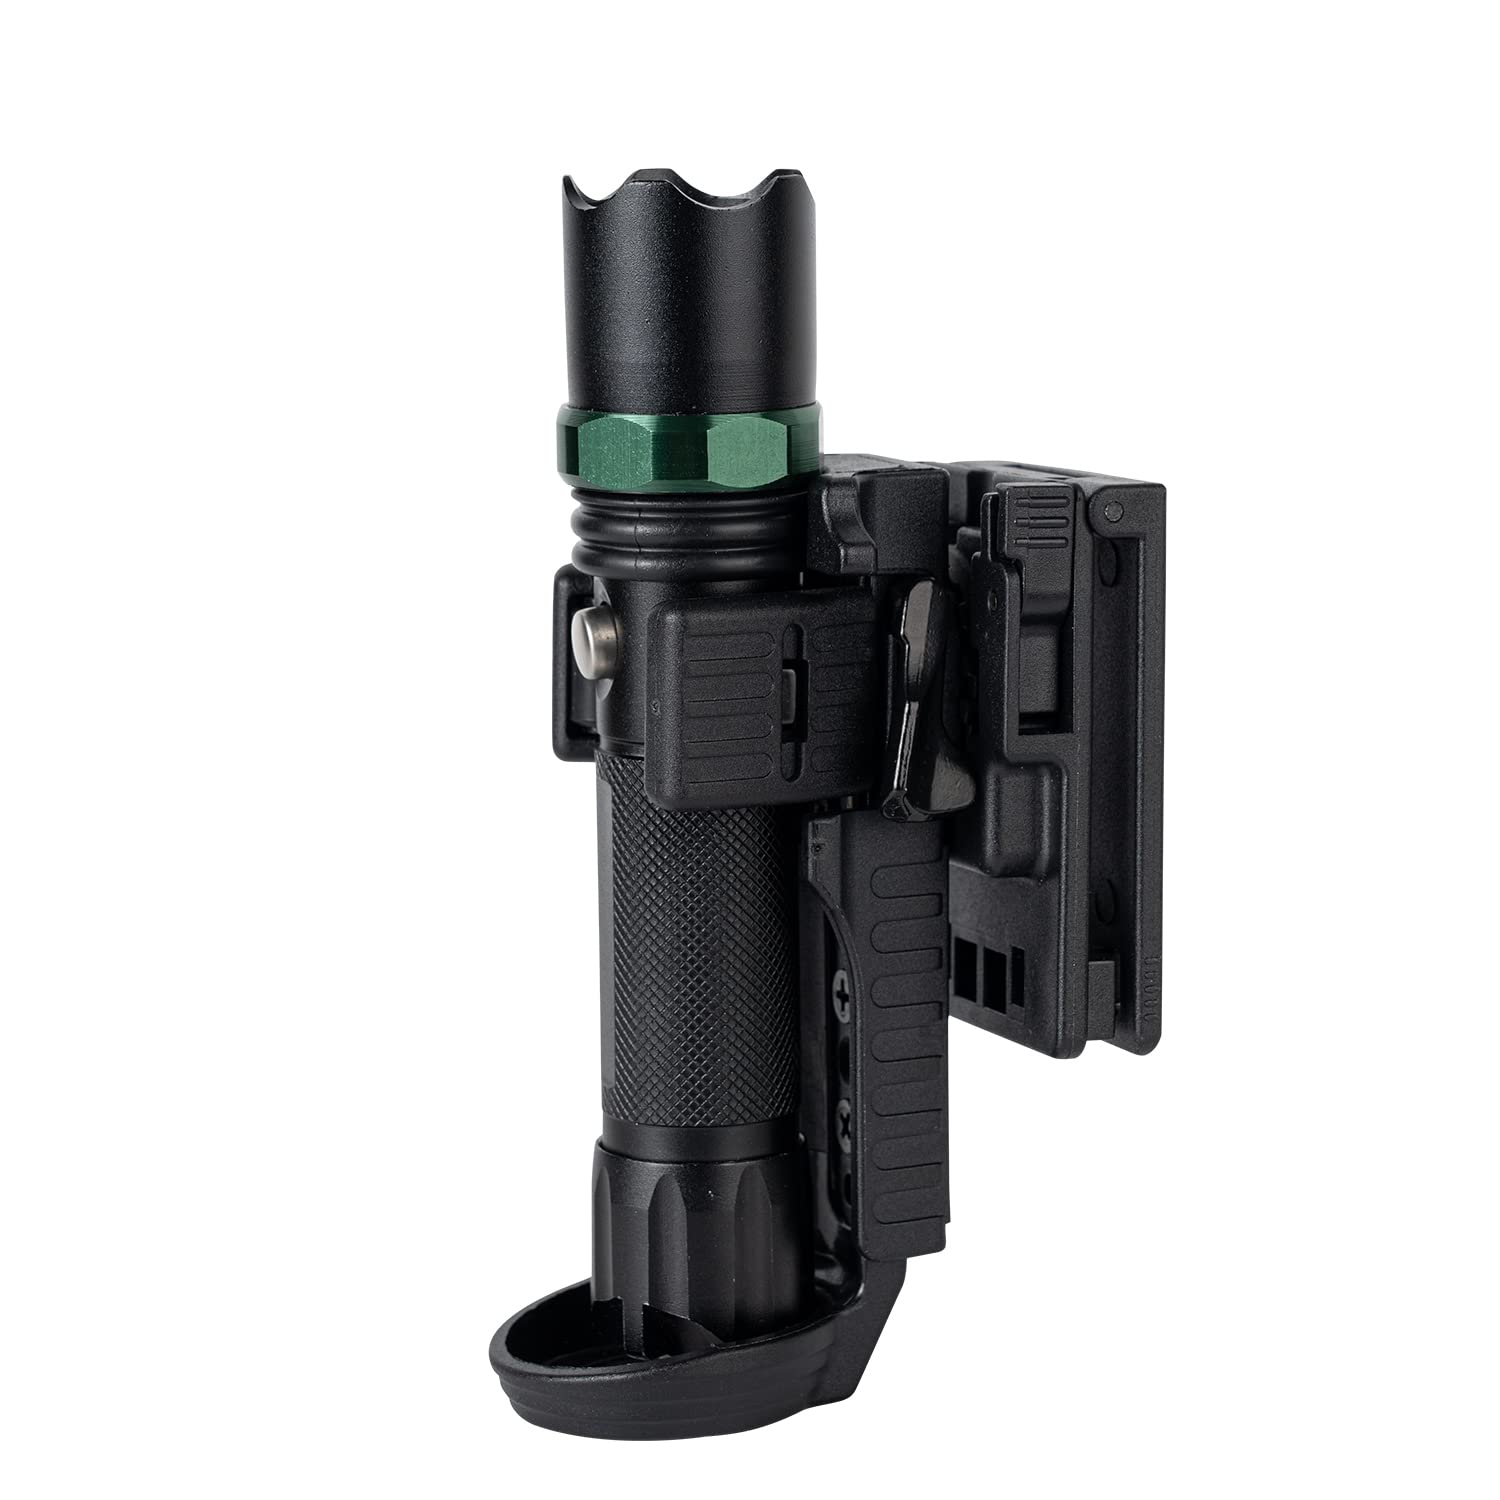 TACNEX Quick Release Flashlight Holder w/Duty Belt Clip Tactical Torch Holster Carrier Rotatable Light Carry Case Stand fit 1"-1.25" Diameter Flashlight for Police Leo Security Military Work Patrol